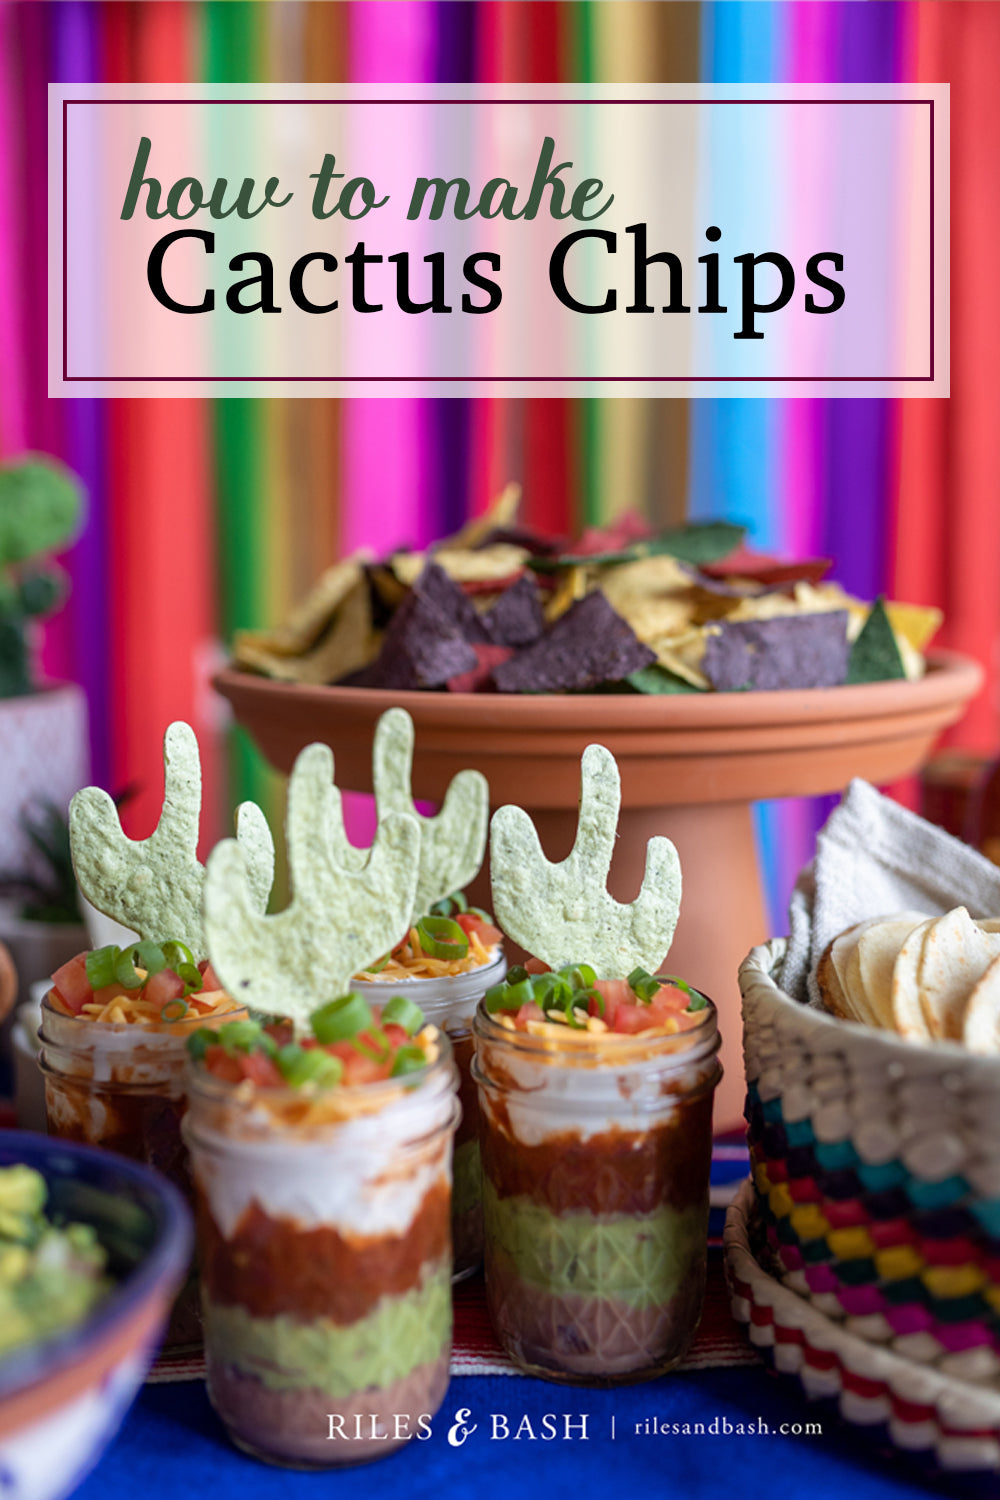 Riles & Bash_How to Make Cactus Chips